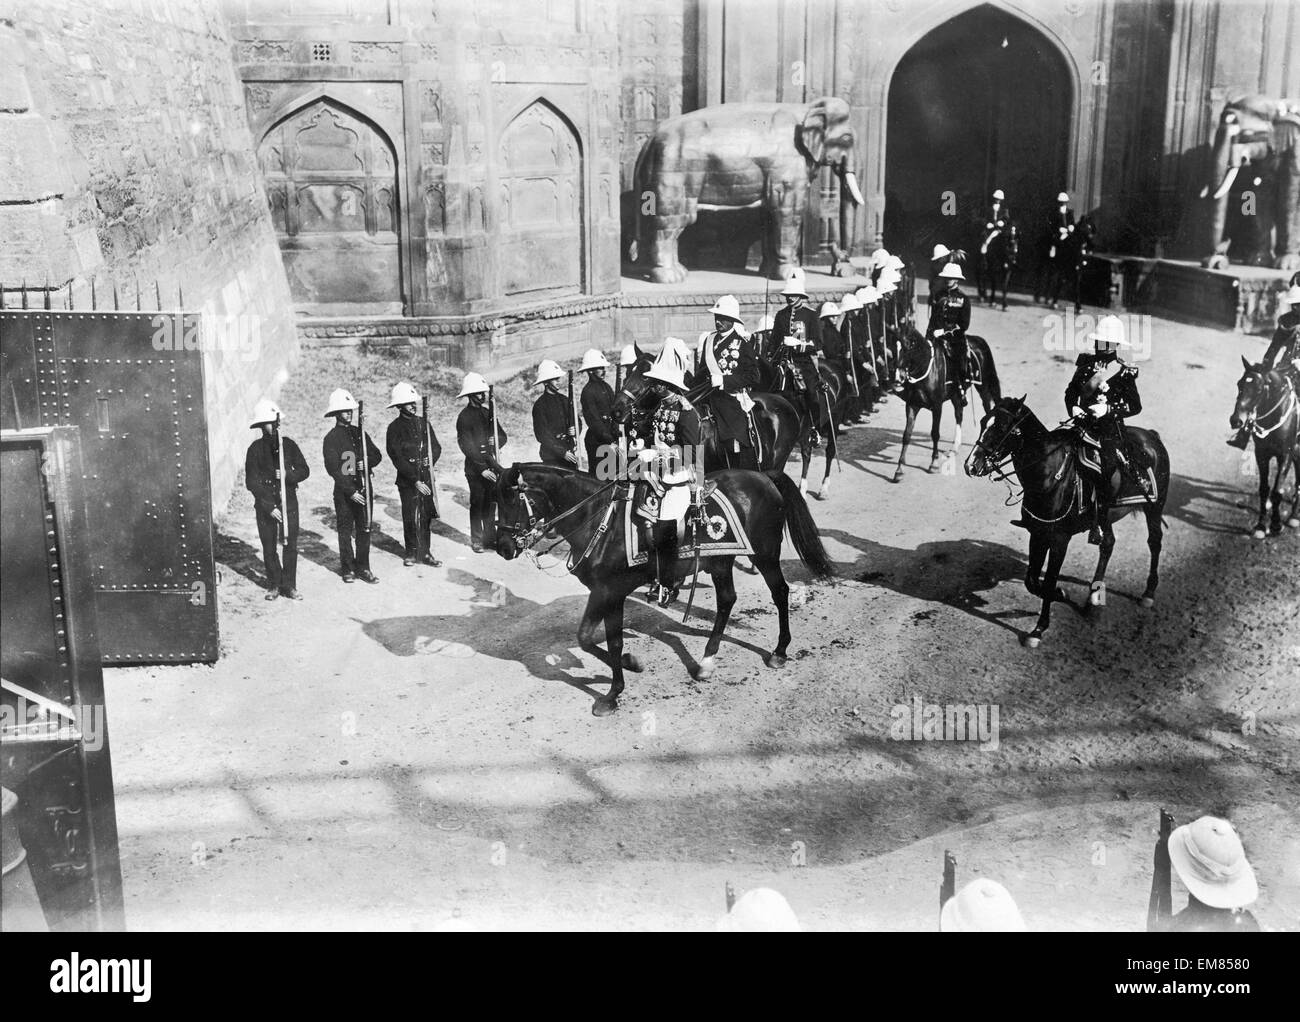 King George V entering the Delhi Durbar (Court of Delhi) for his Coronation. 12th December 1911 The Durbar was a mass assembly at Coronation Park, Delhi, India, to mark the coronation of a King and Queen of the United Kingdom. Also known as the Imperial Durbar, it was held three times, in 1877, 1903, and 1911, at the height of the British Empire. The 1911 Durbar was the only one attended by the sovereign, George V. Stock Photo